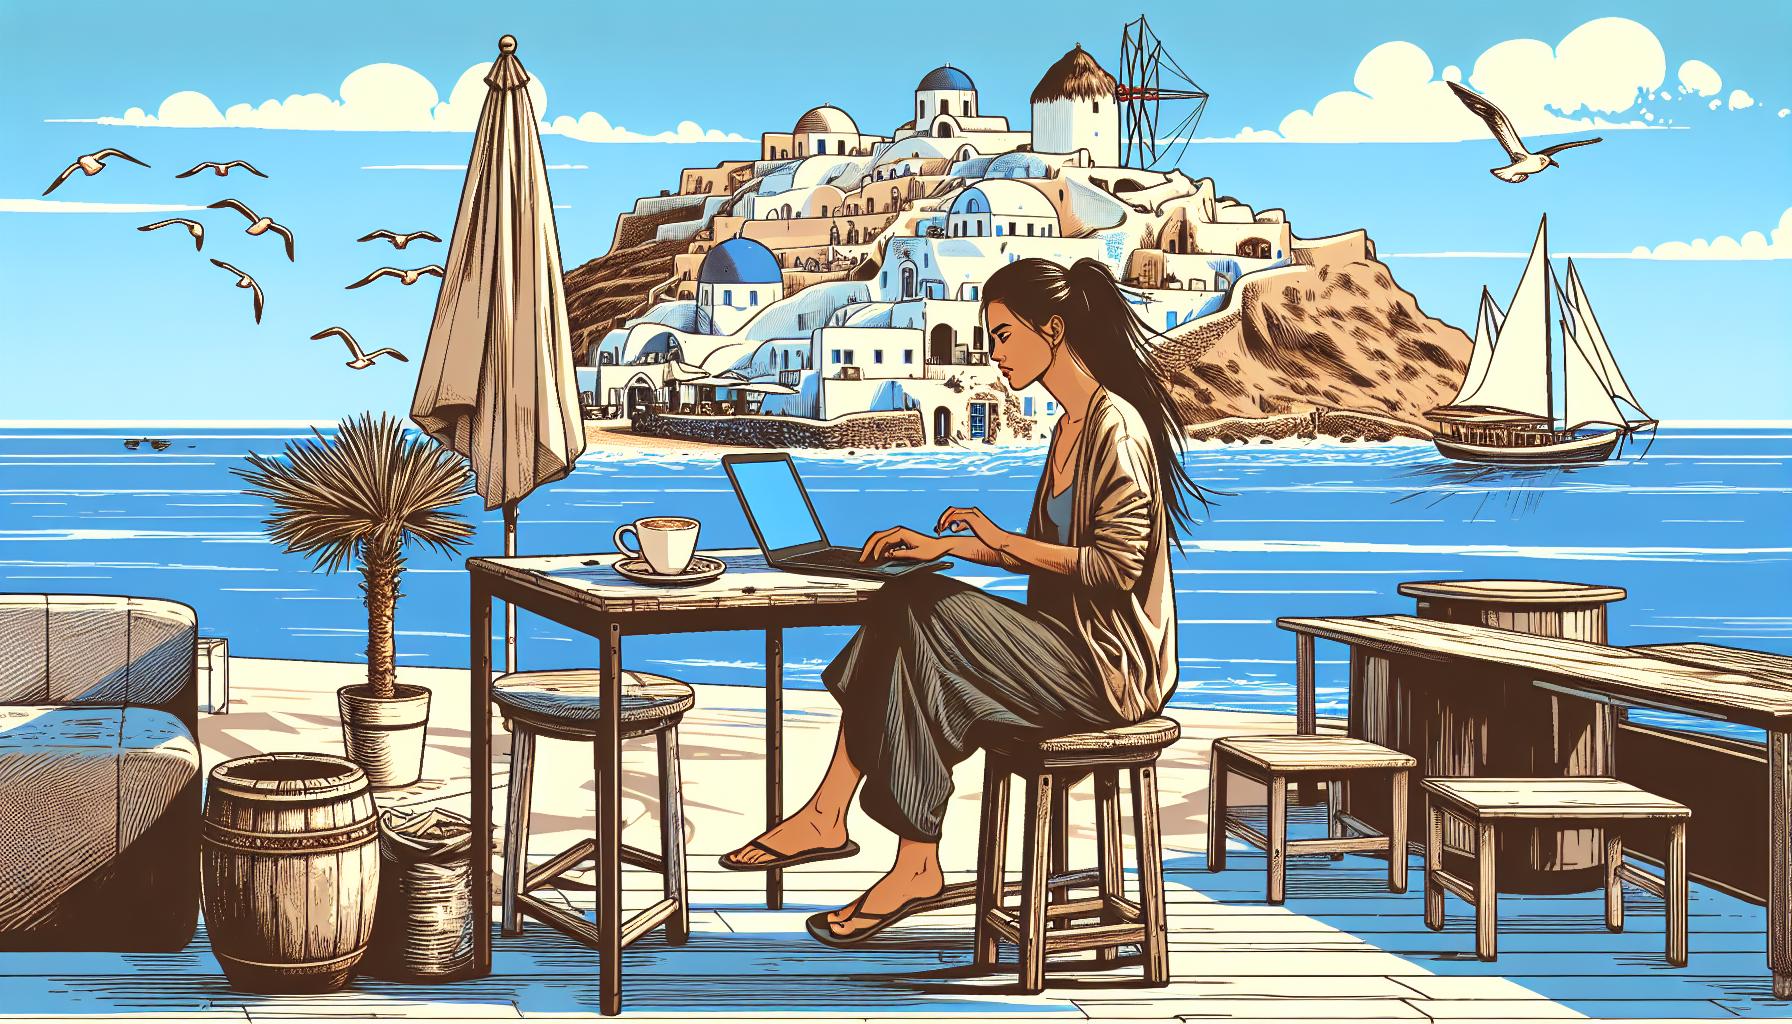 Destinations The 8 Best Greek Islands for Digital Nomads ReallyRemoteWorker Discover the top Greek islands for digital nomads in our comprehensive guide. Learn about each island's unique offerings, from reliable internet connectivity to affordable living costs and stunning views. Live, work, and play in Santorini, Mykonos, Crete, and more! Find your perfect digital nomad paradise in Greece today.